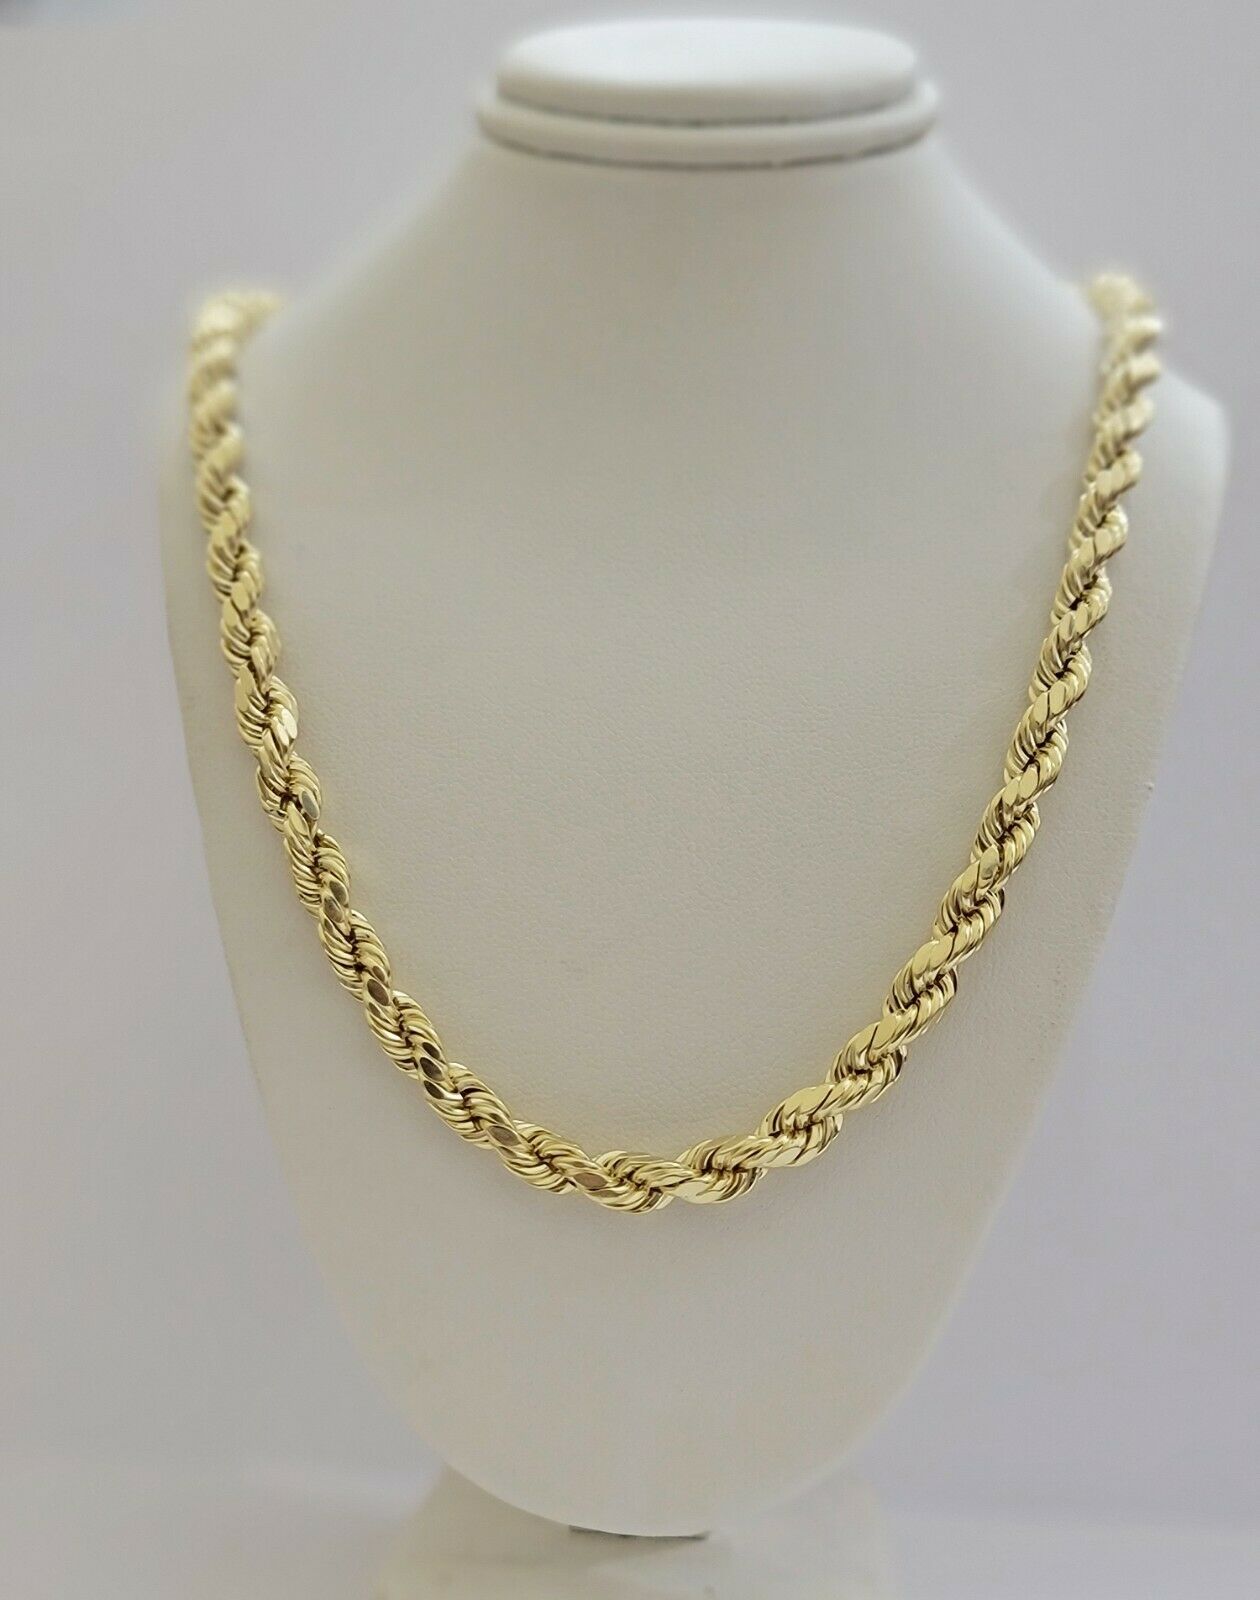 22 Real 10K Yellow Gold Rope Chain Necklace 7mm Men's 22 inch New Diamond Cuts